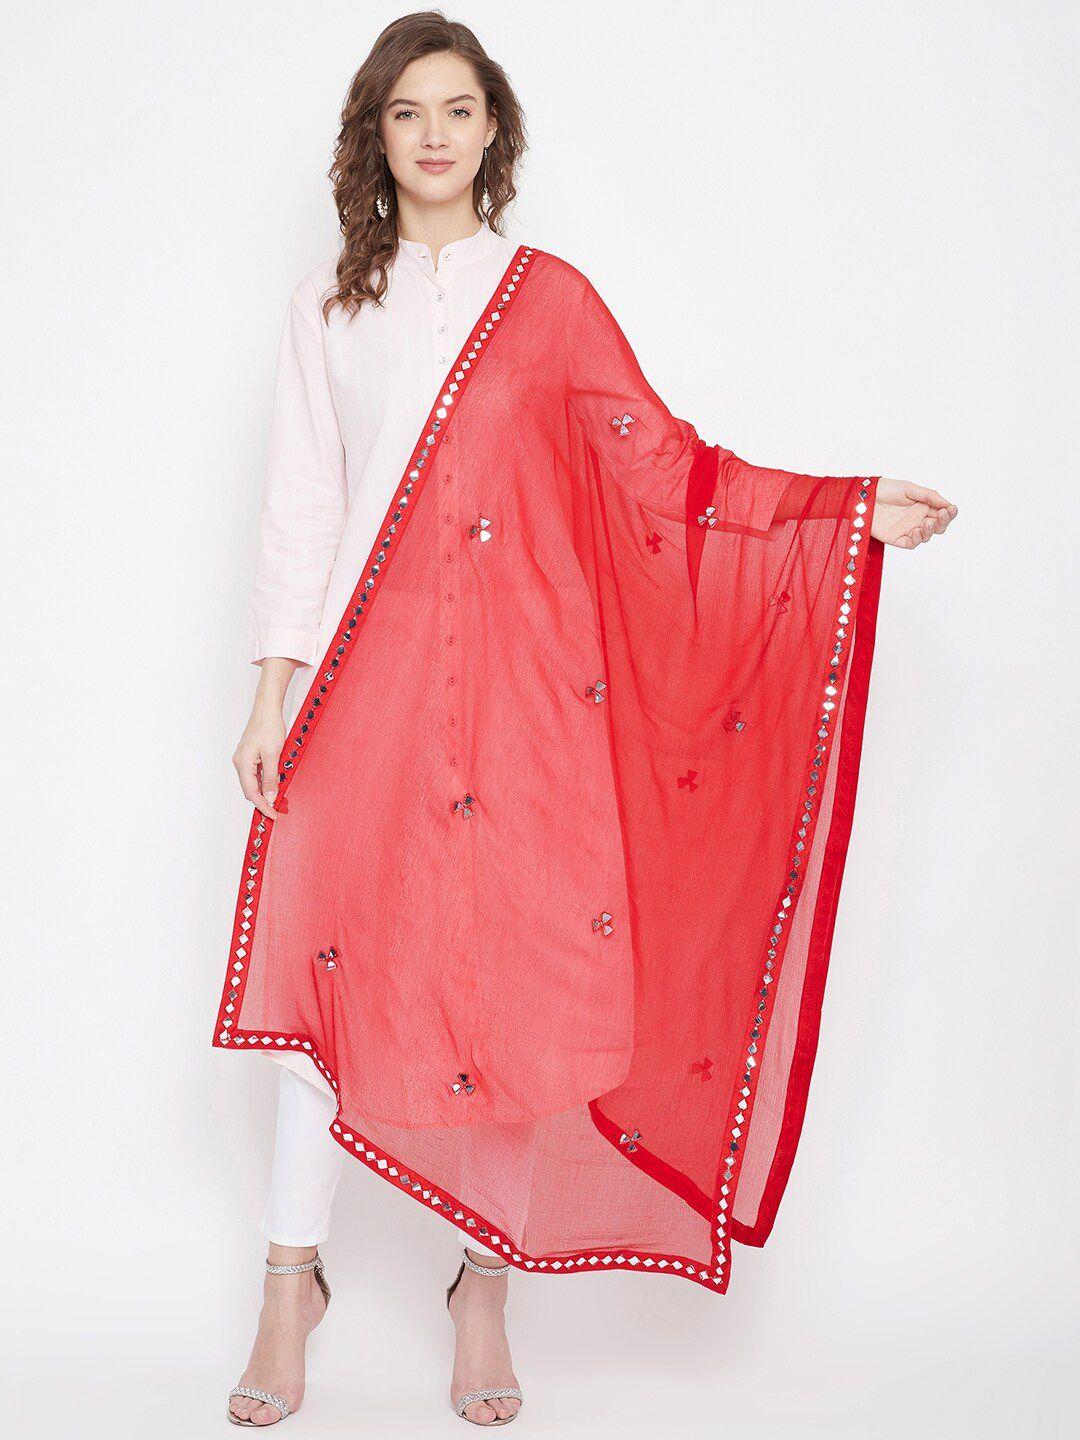 clora-creation-red-&-silver-toned-embroidered-mirror-work-dupatta